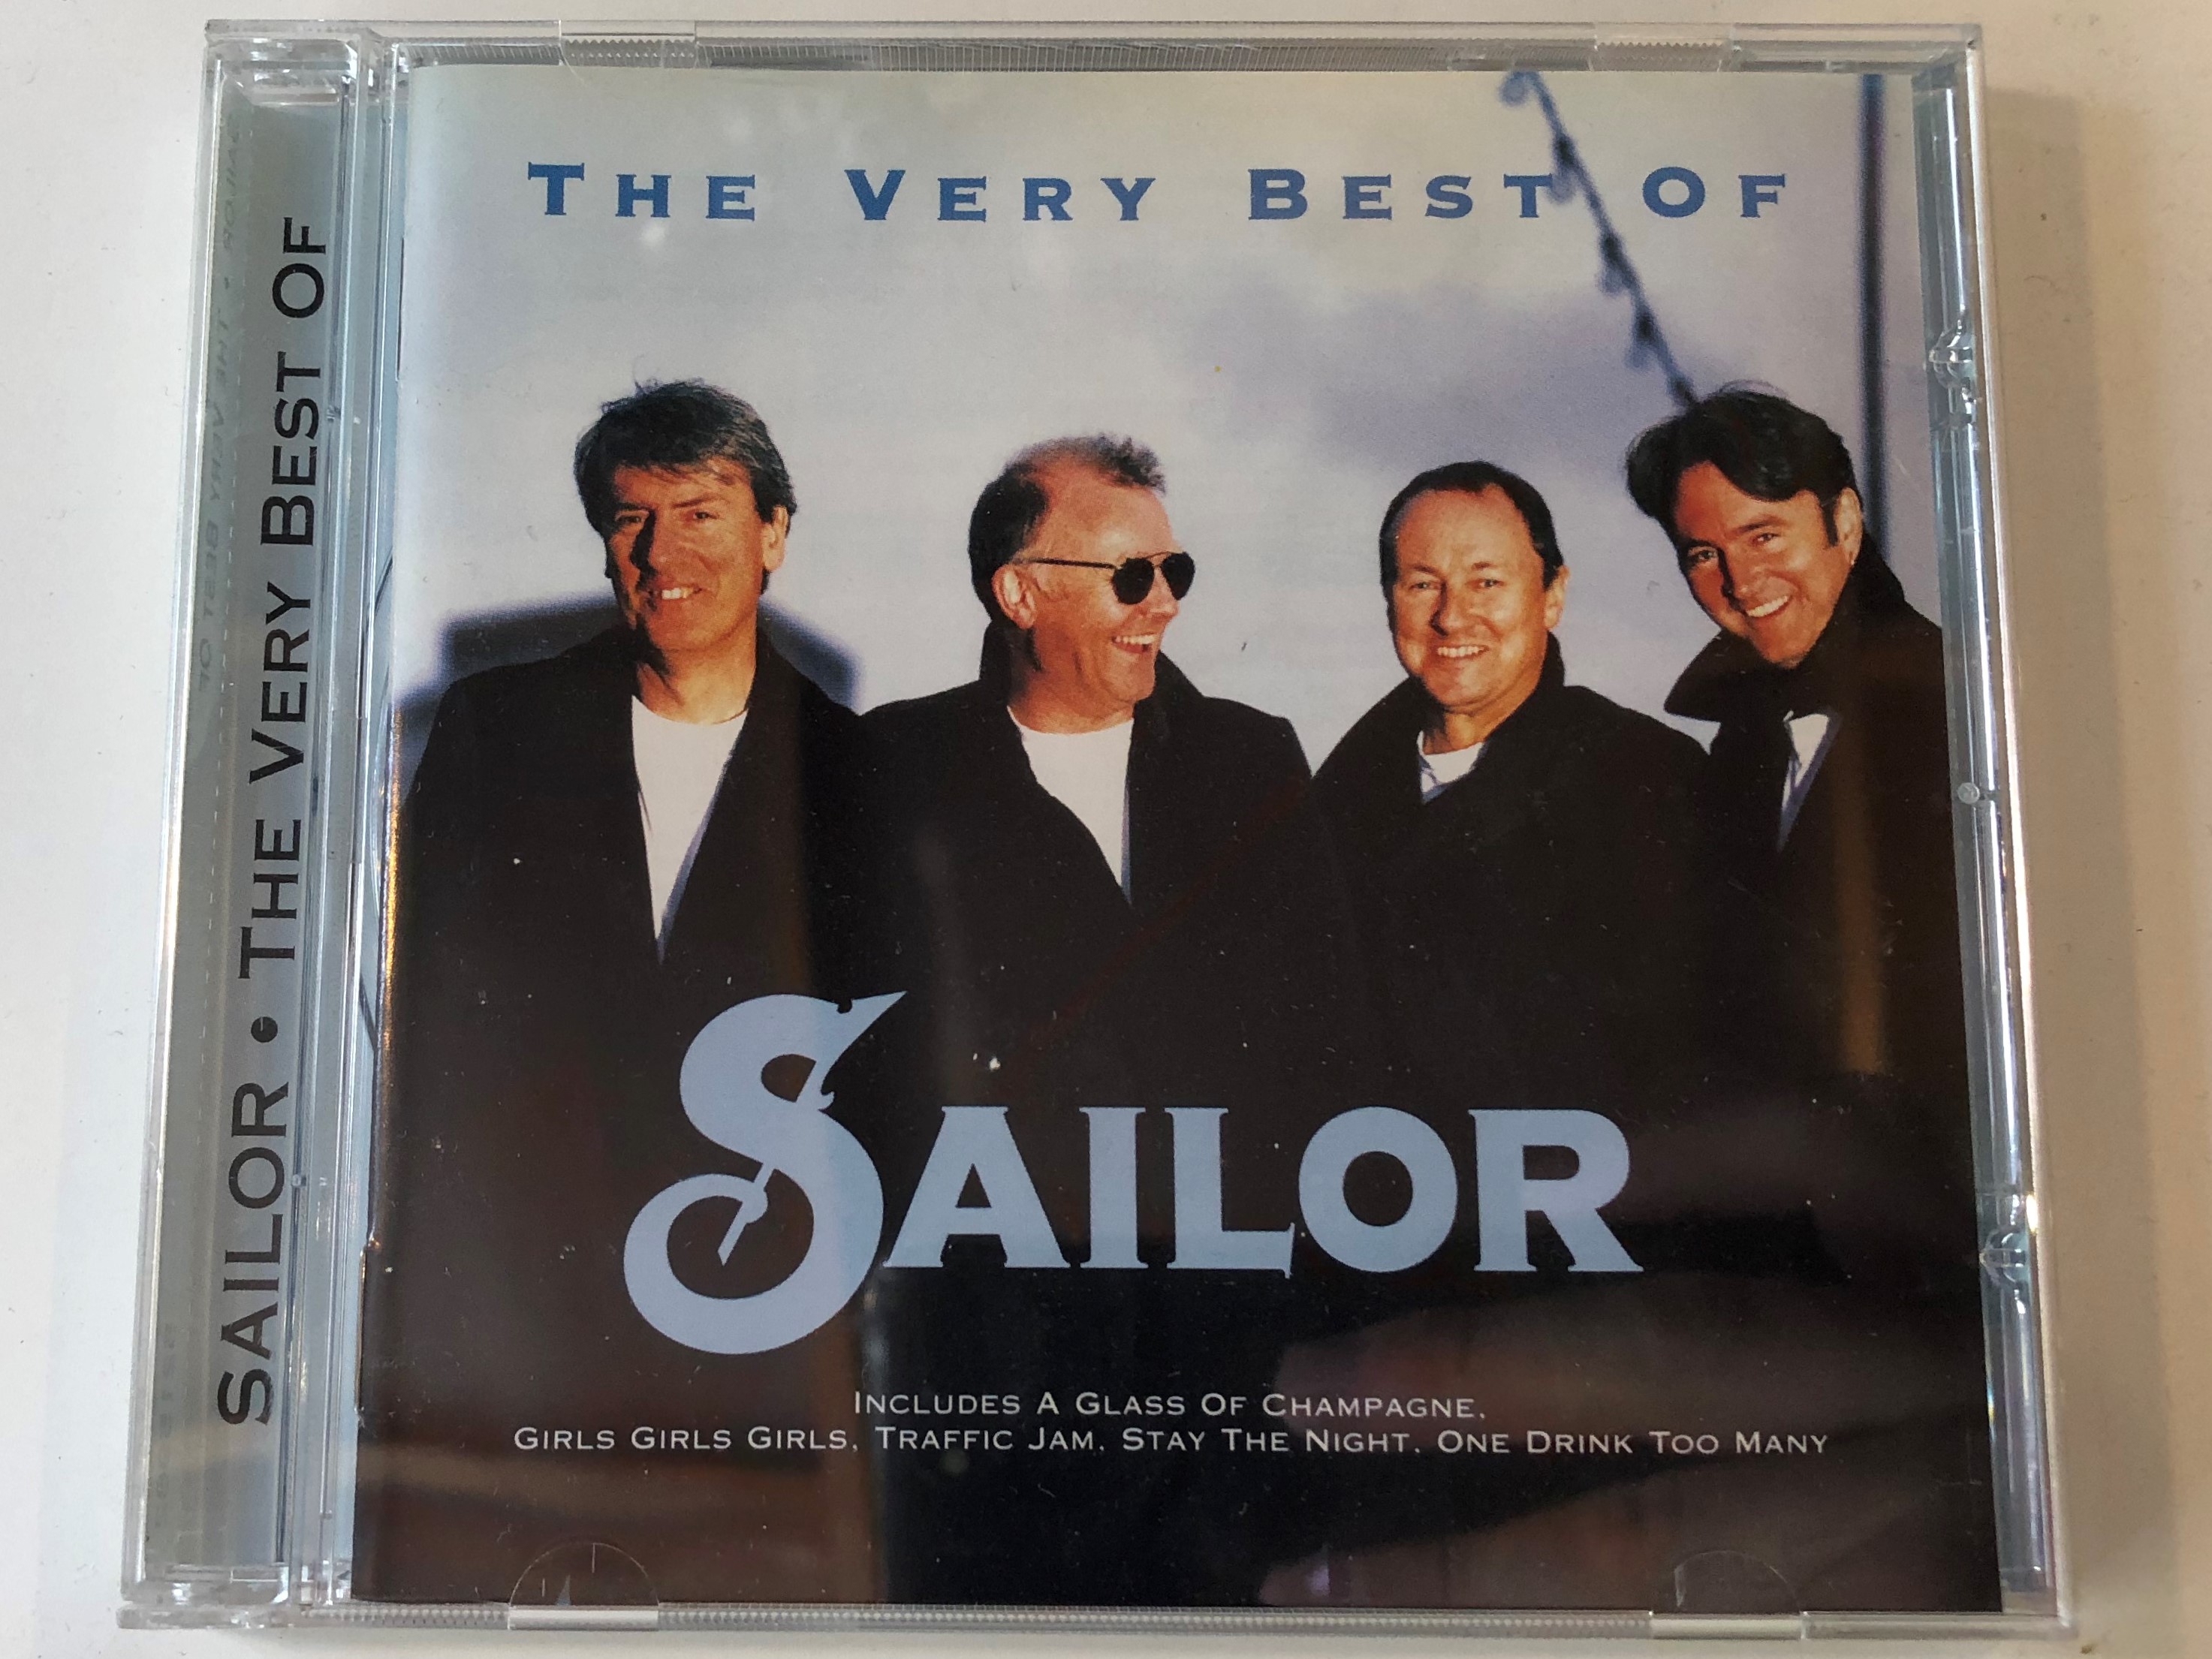 the-very-best-of-sailor-includes-a-glass-of-champagne-girls-girls-girls-traffic-jam-stay-the-night-one-drink-too-many-cmc-records-as-audio-cd-1997-0724352159826-1-.jpg